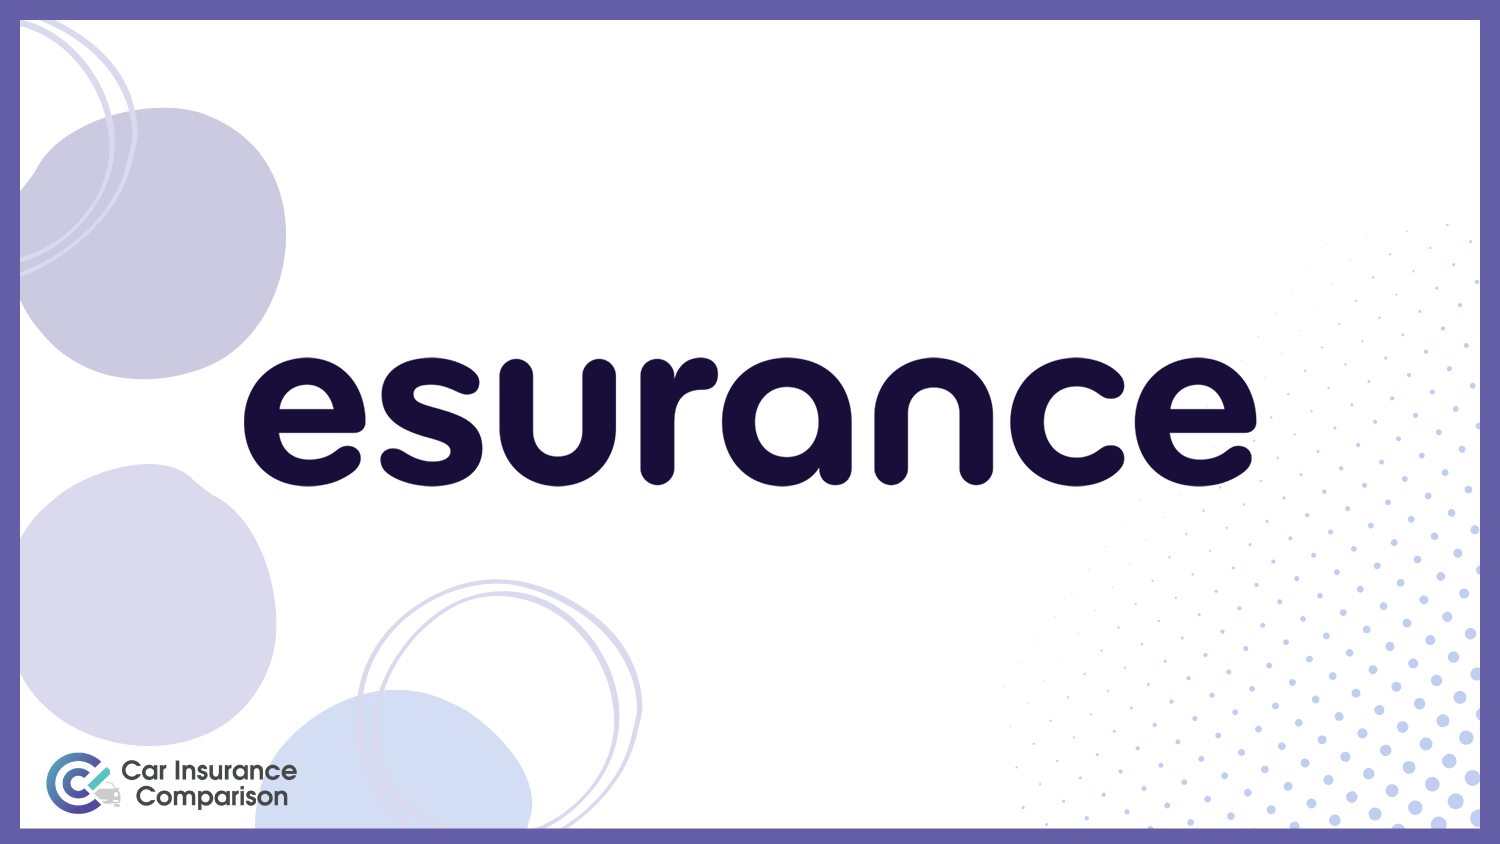 Esurance: Best Car Insurance for Low-Income Drivers